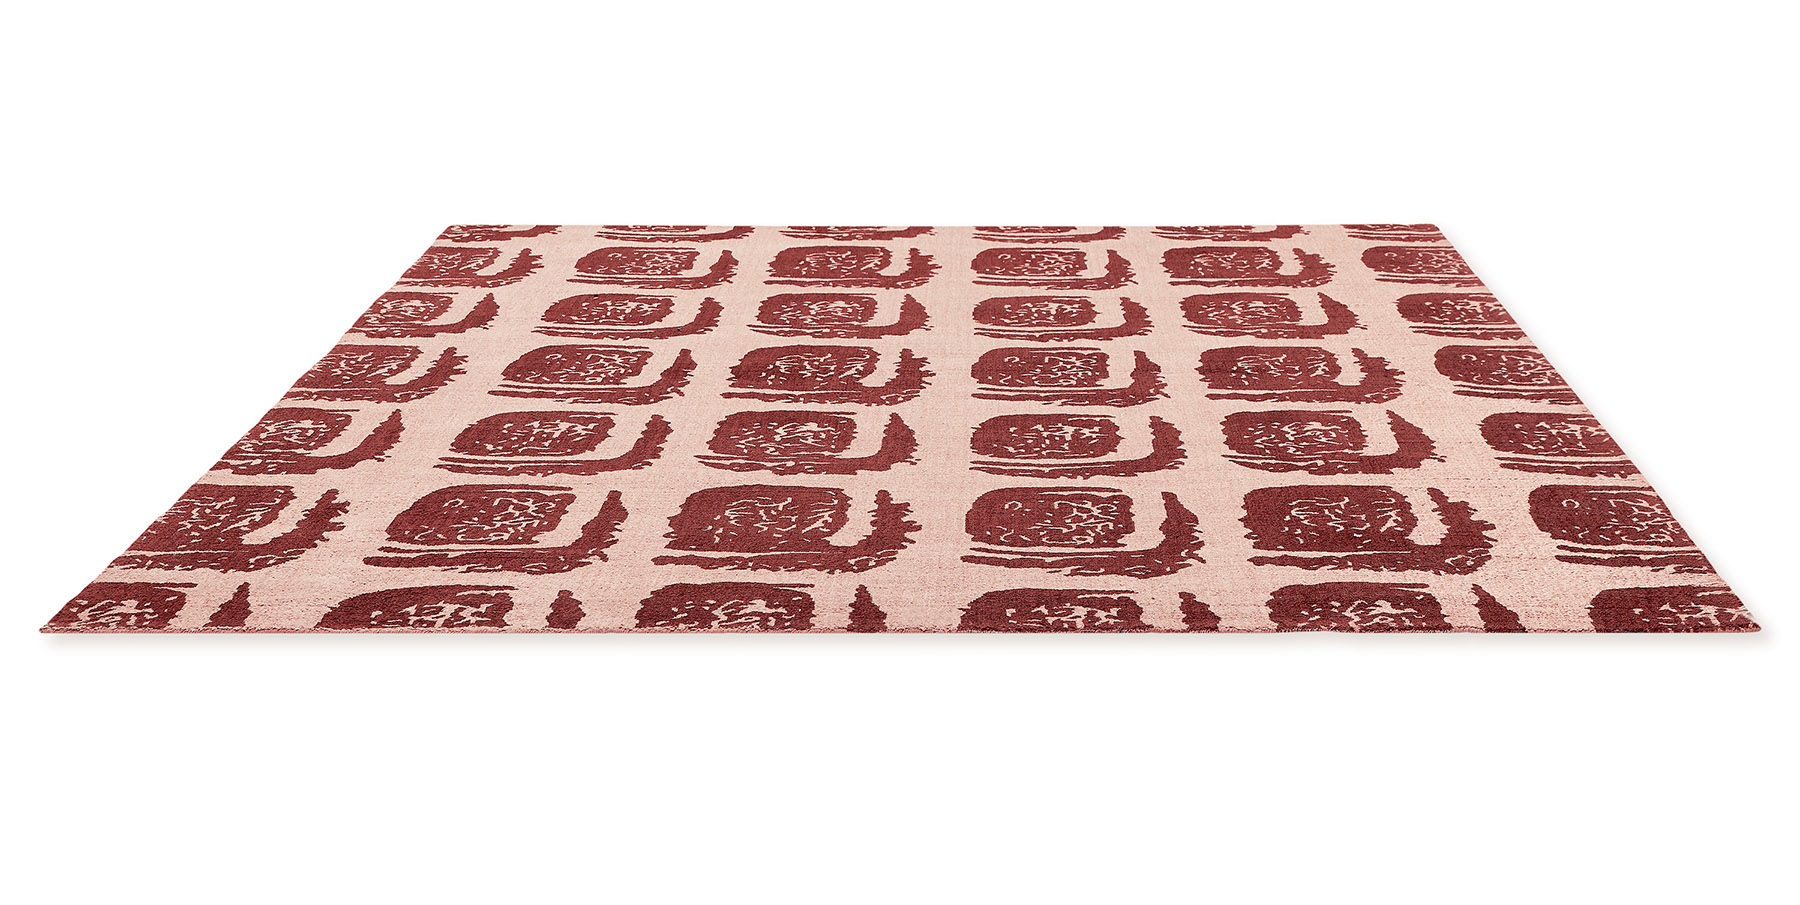 Woodblock Red Rug ☞ Size: 170 x 240 cm